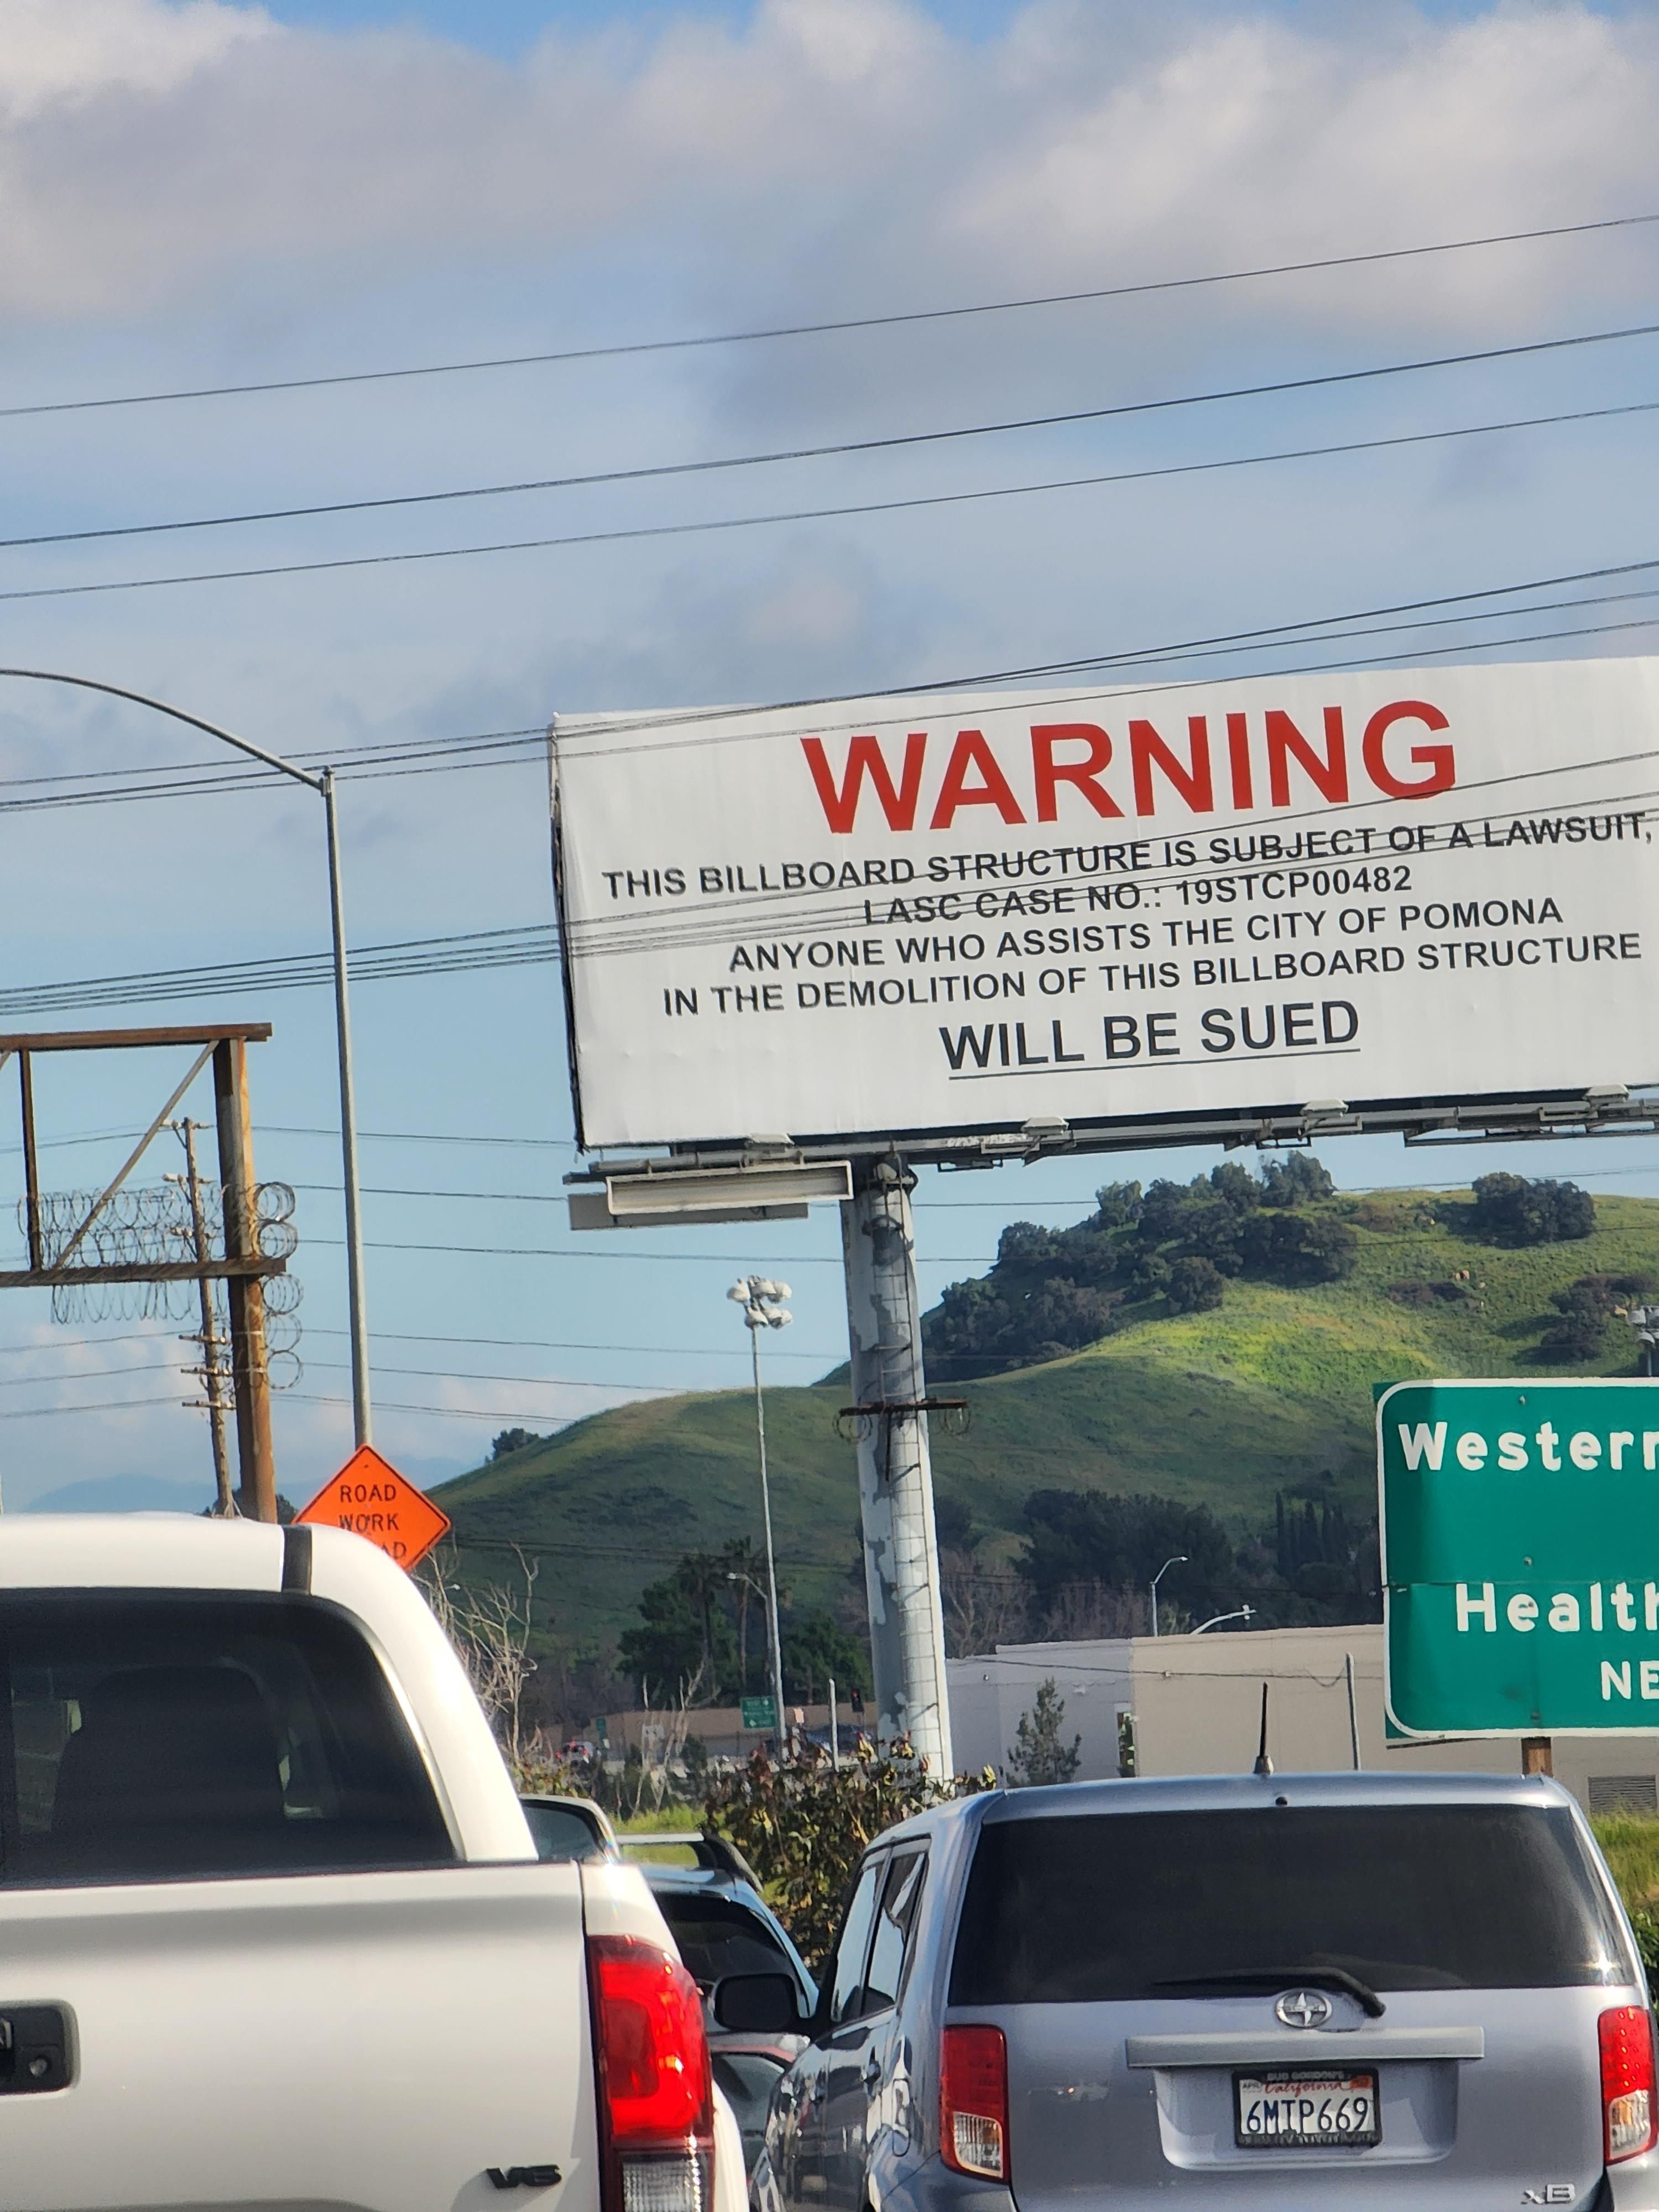 Ok... This might be the most aggressive billboard I've seen yet.